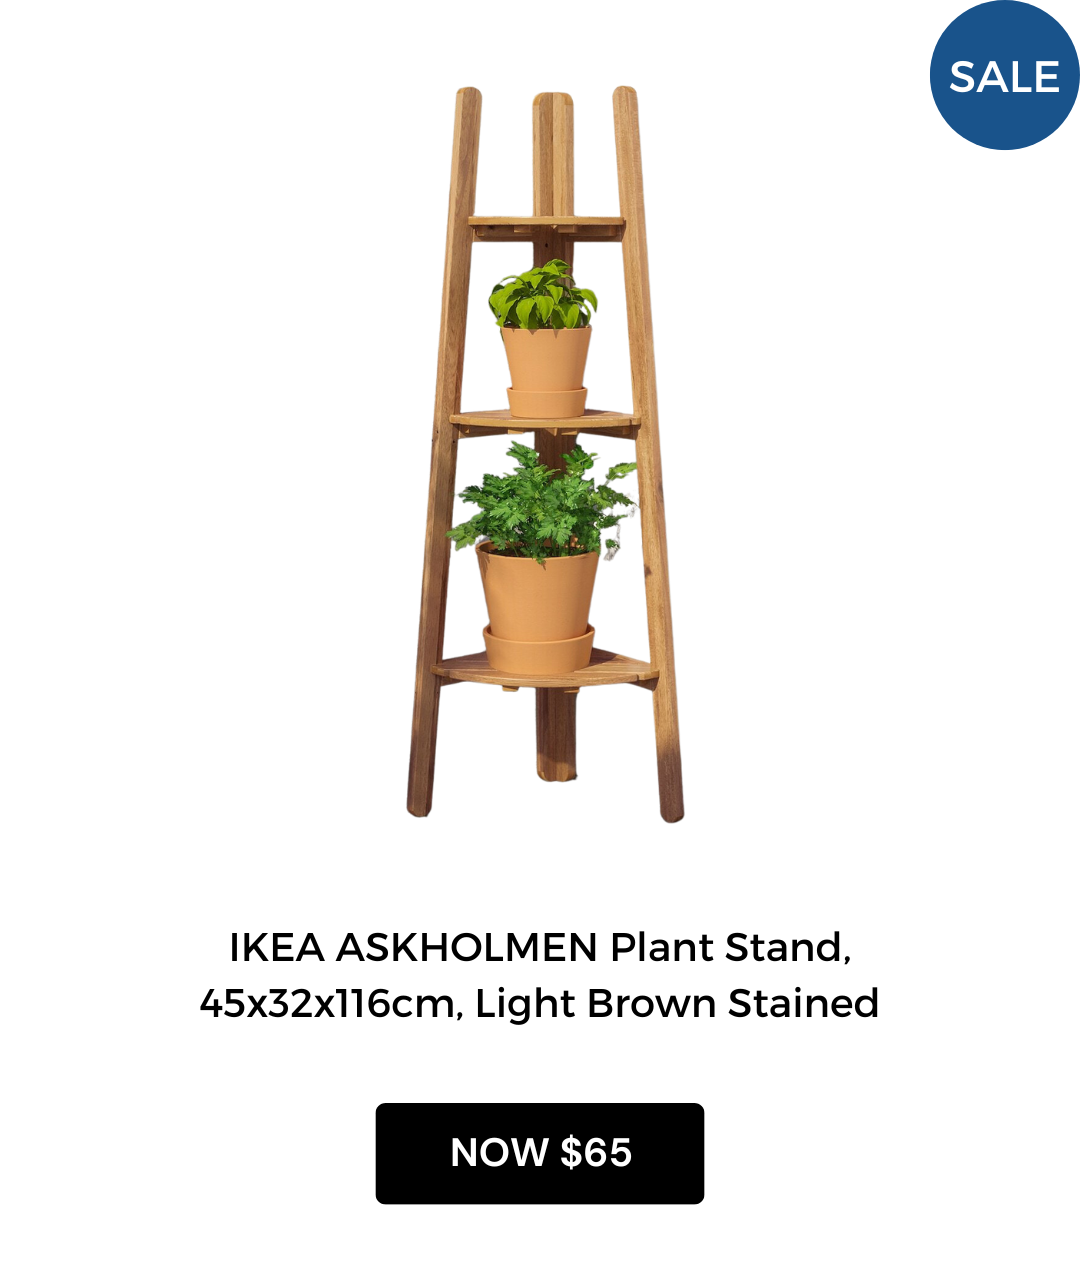 IKEA ASKHOLMEN Plant Stand, 45x32x116cm, Light Brown Stained